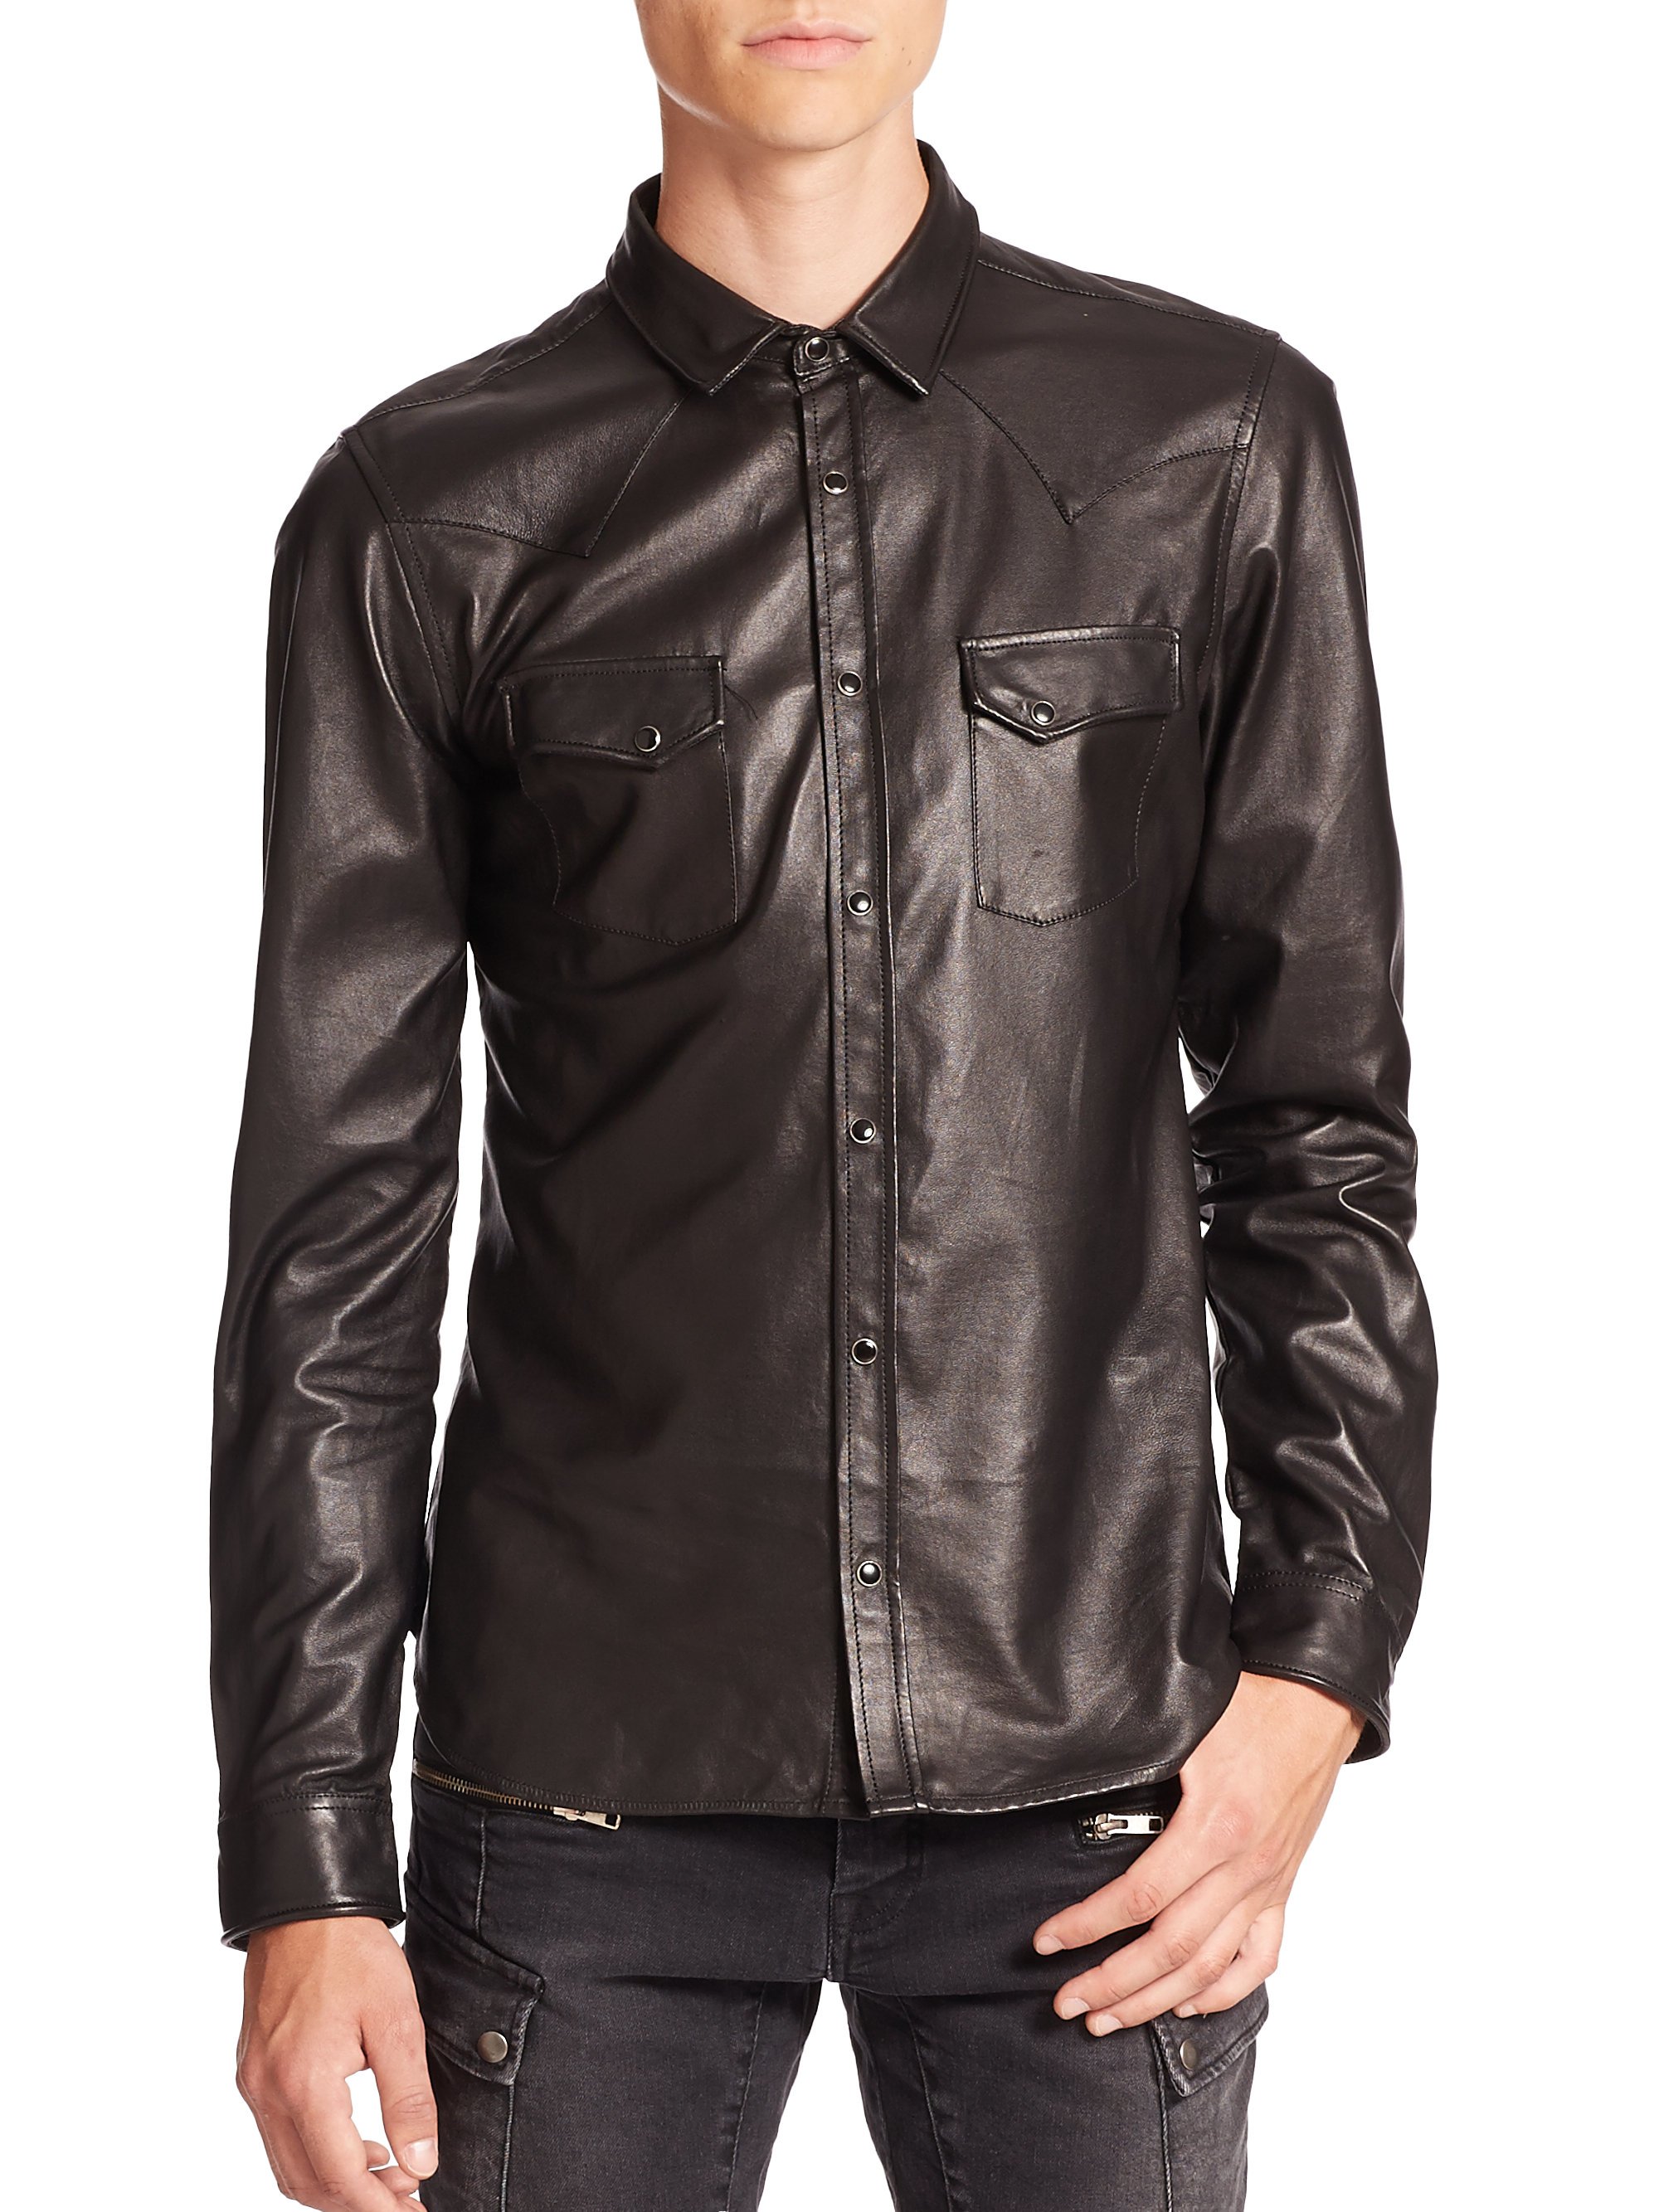 Lyst - The Kooples Leather Shirt in Black for Men